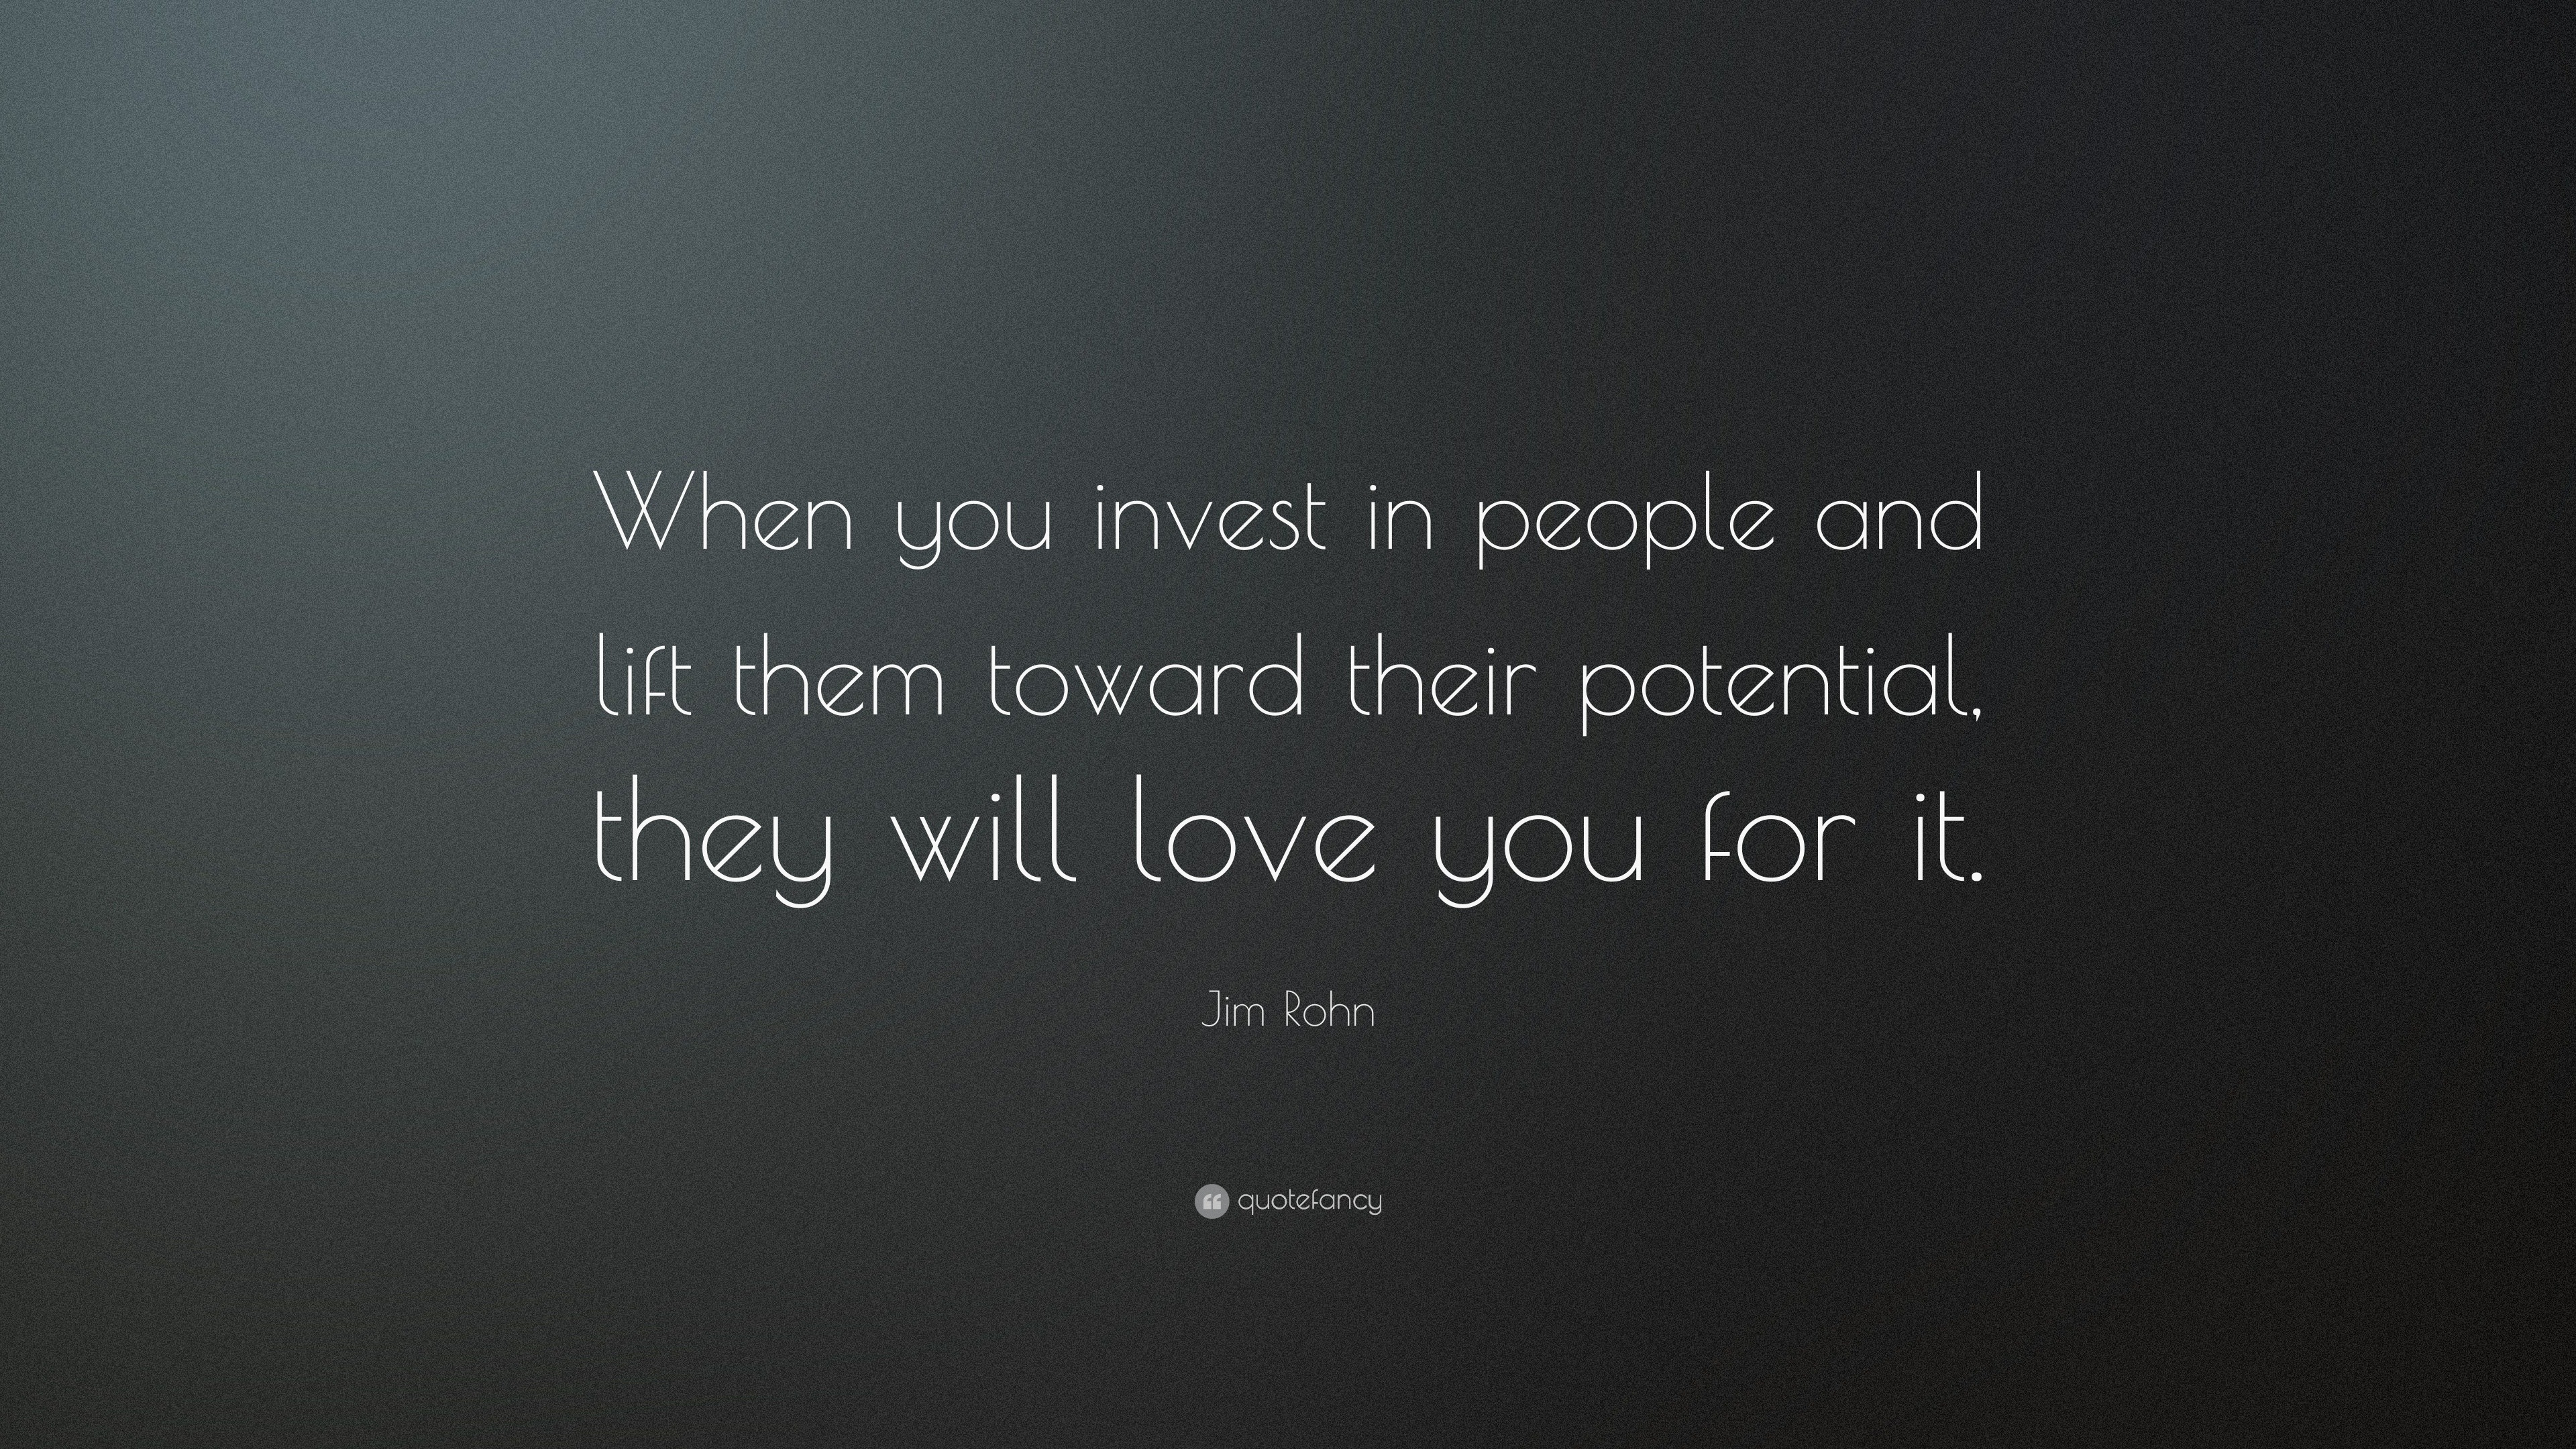 Jim Rohn Quote “When you invest in people and lift them